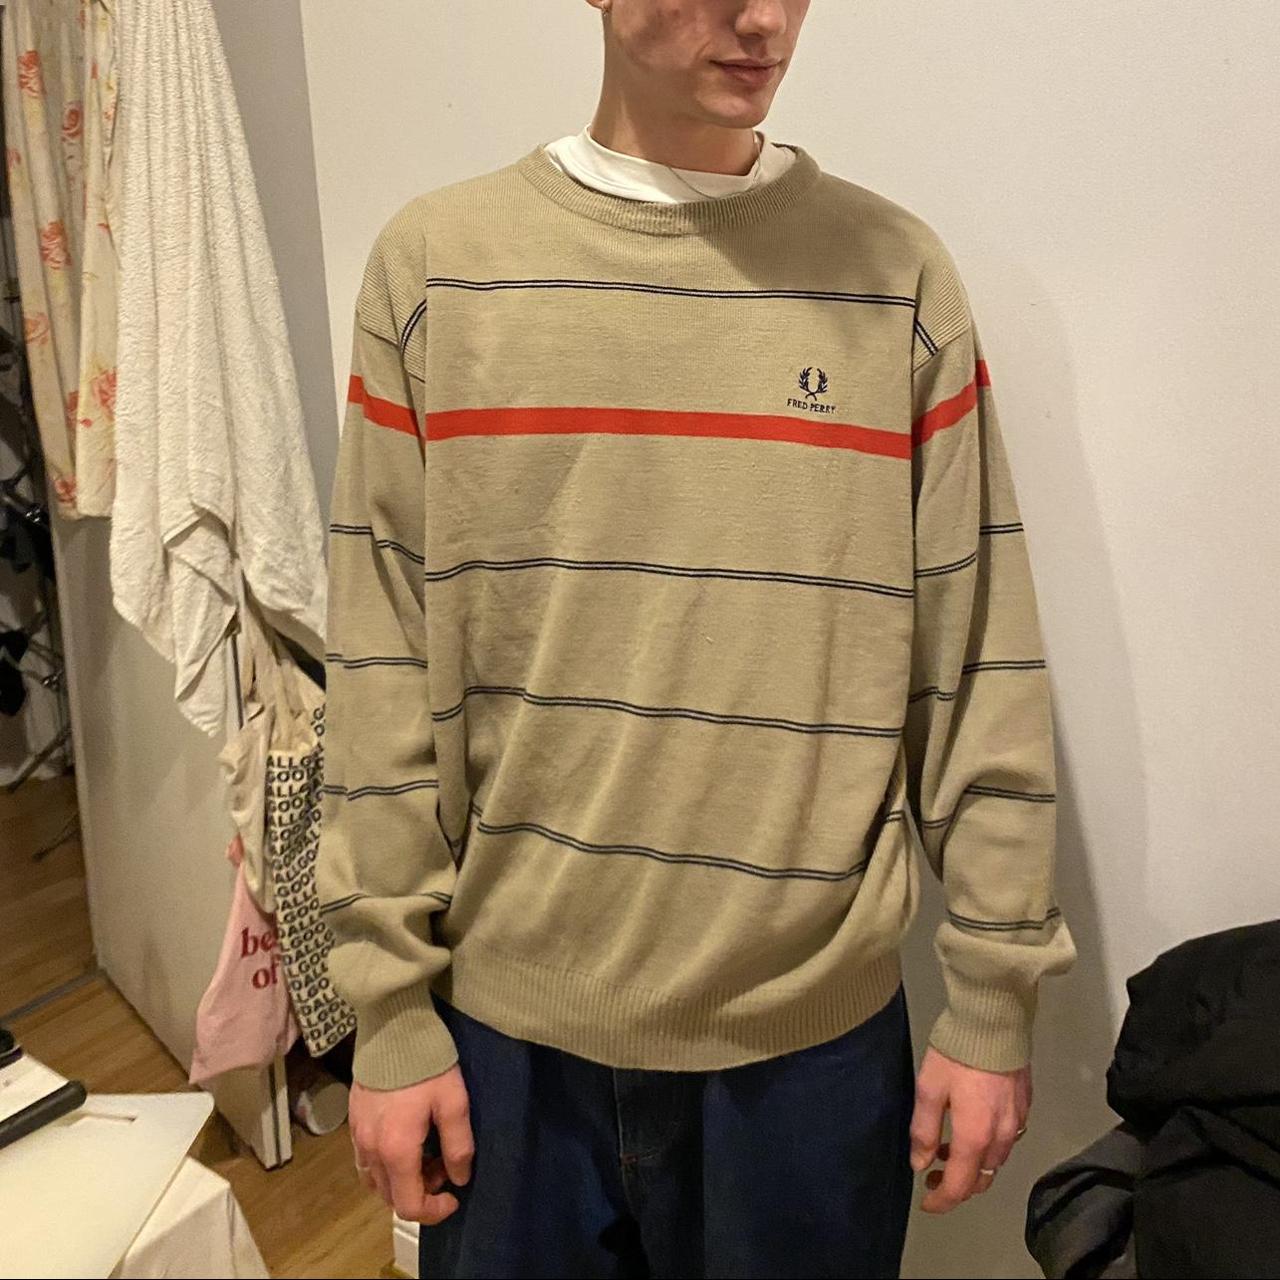 Fred Perry jumper - Depop